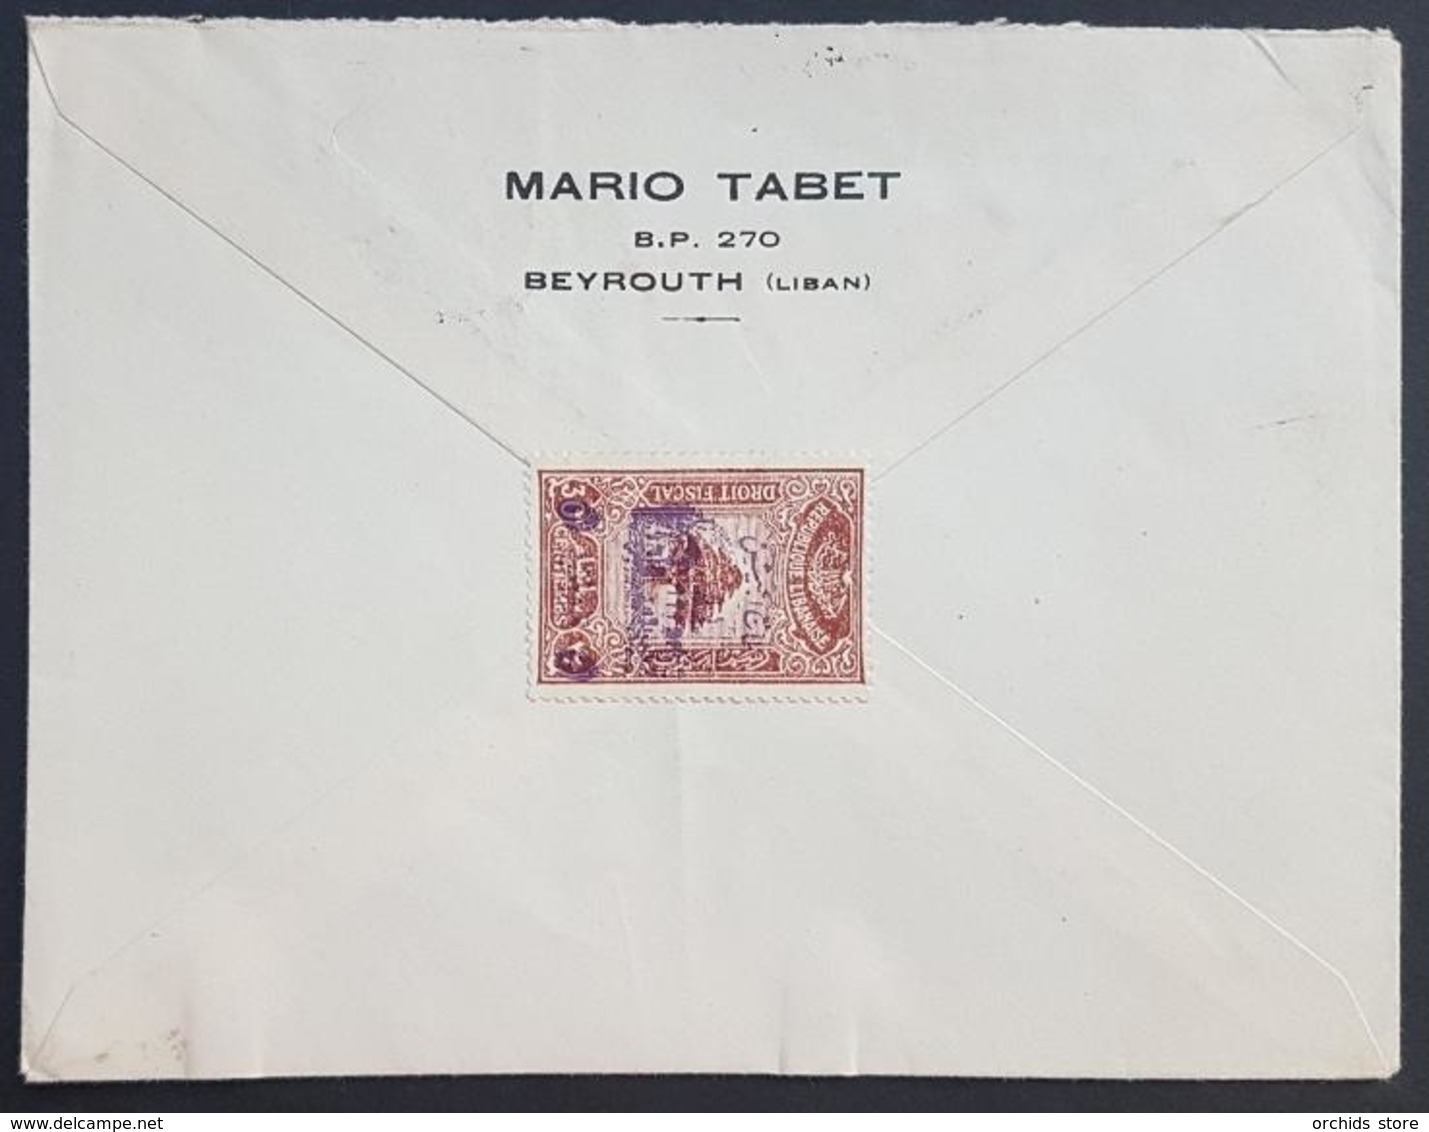 BL - Lebanon 1945 Cover BEYROUTH R.P Compared To Longo Catalogue, Unrecorded Type ? - Libano